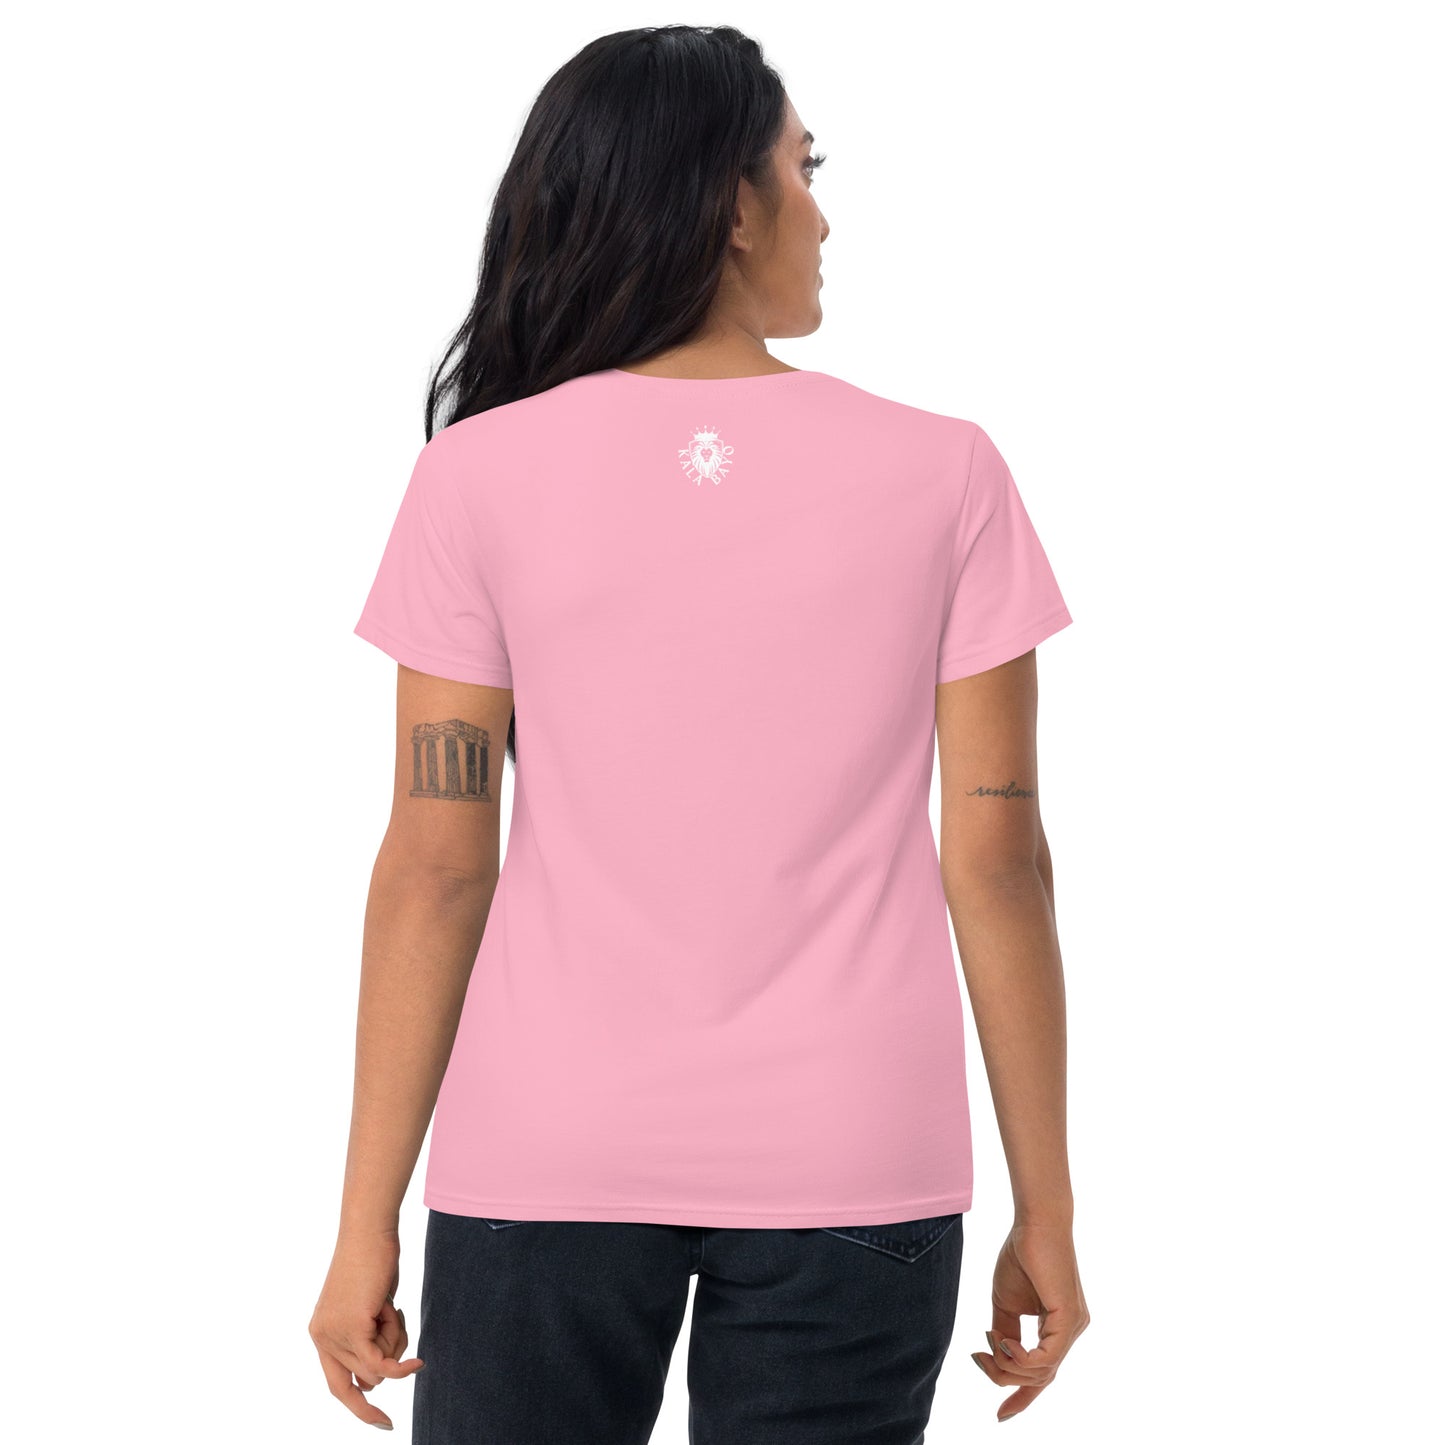 Barbados - "Cheese on Bread" Women's T-shirt